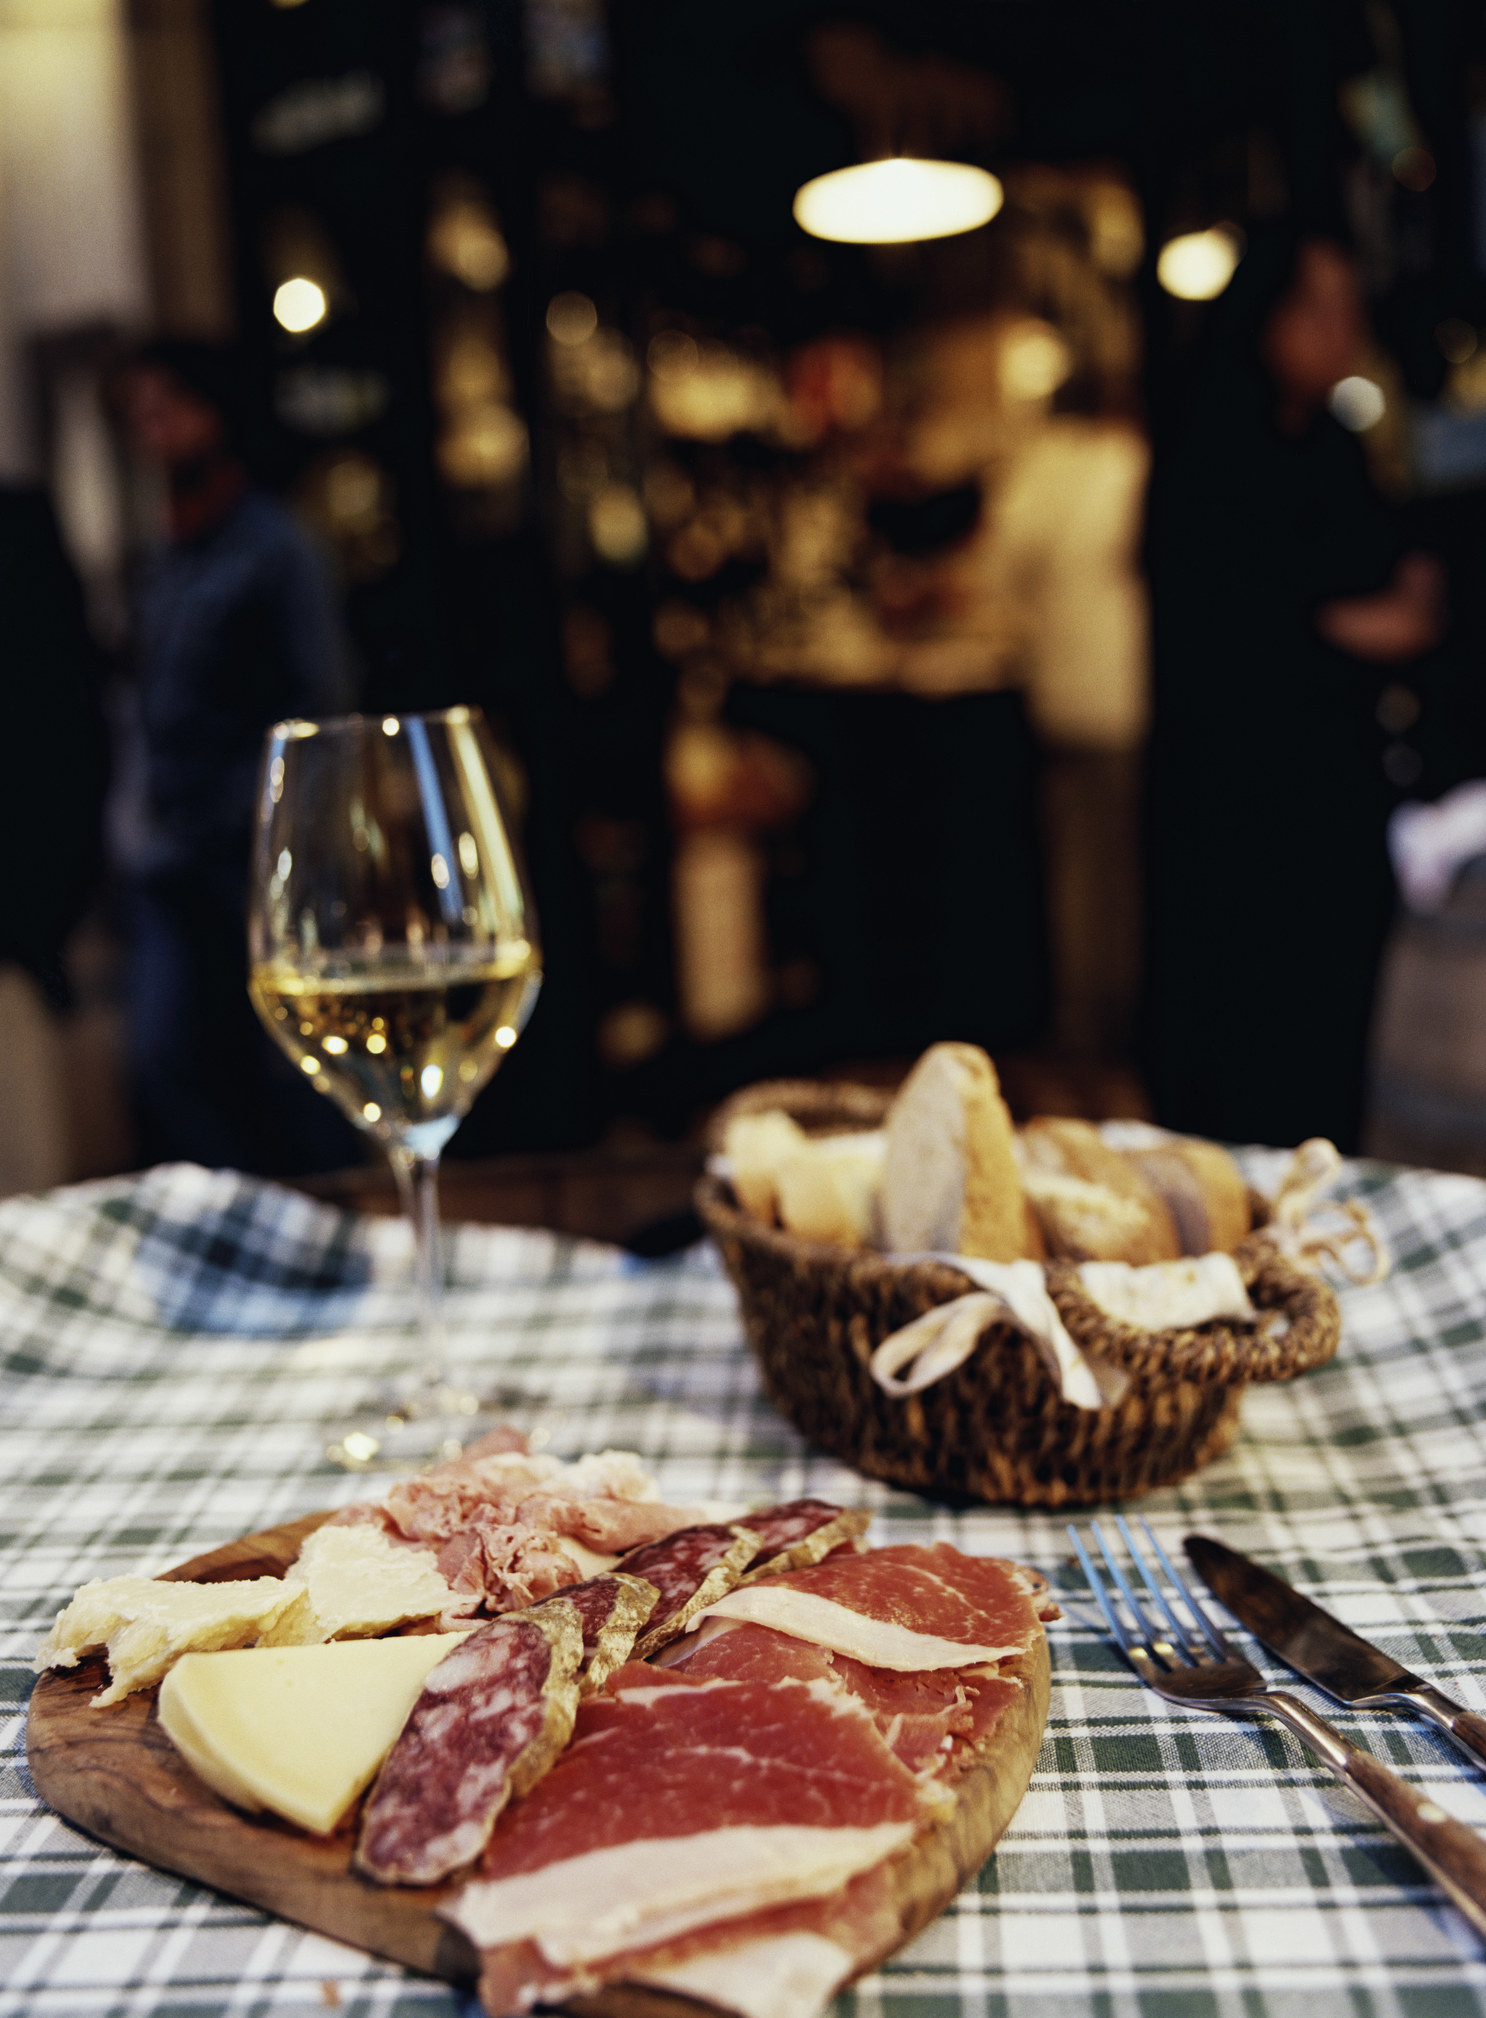 A table with wine,bread, cheese, and meat in Italy.